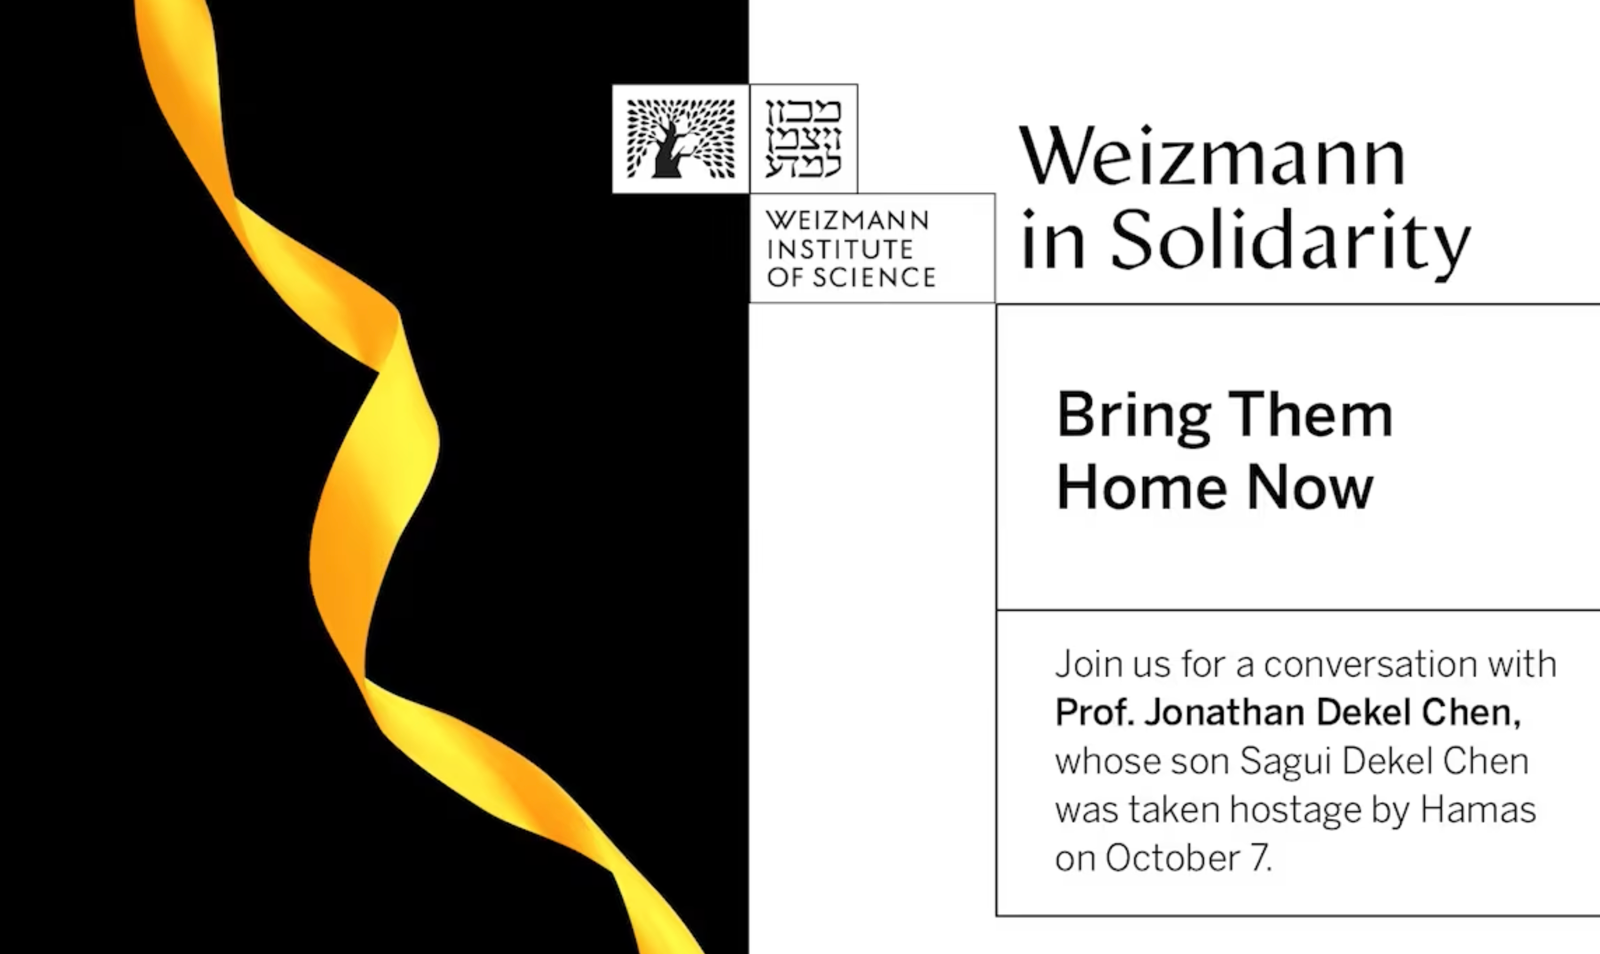 Weizmann in Solidarity: Bring Them Home Now